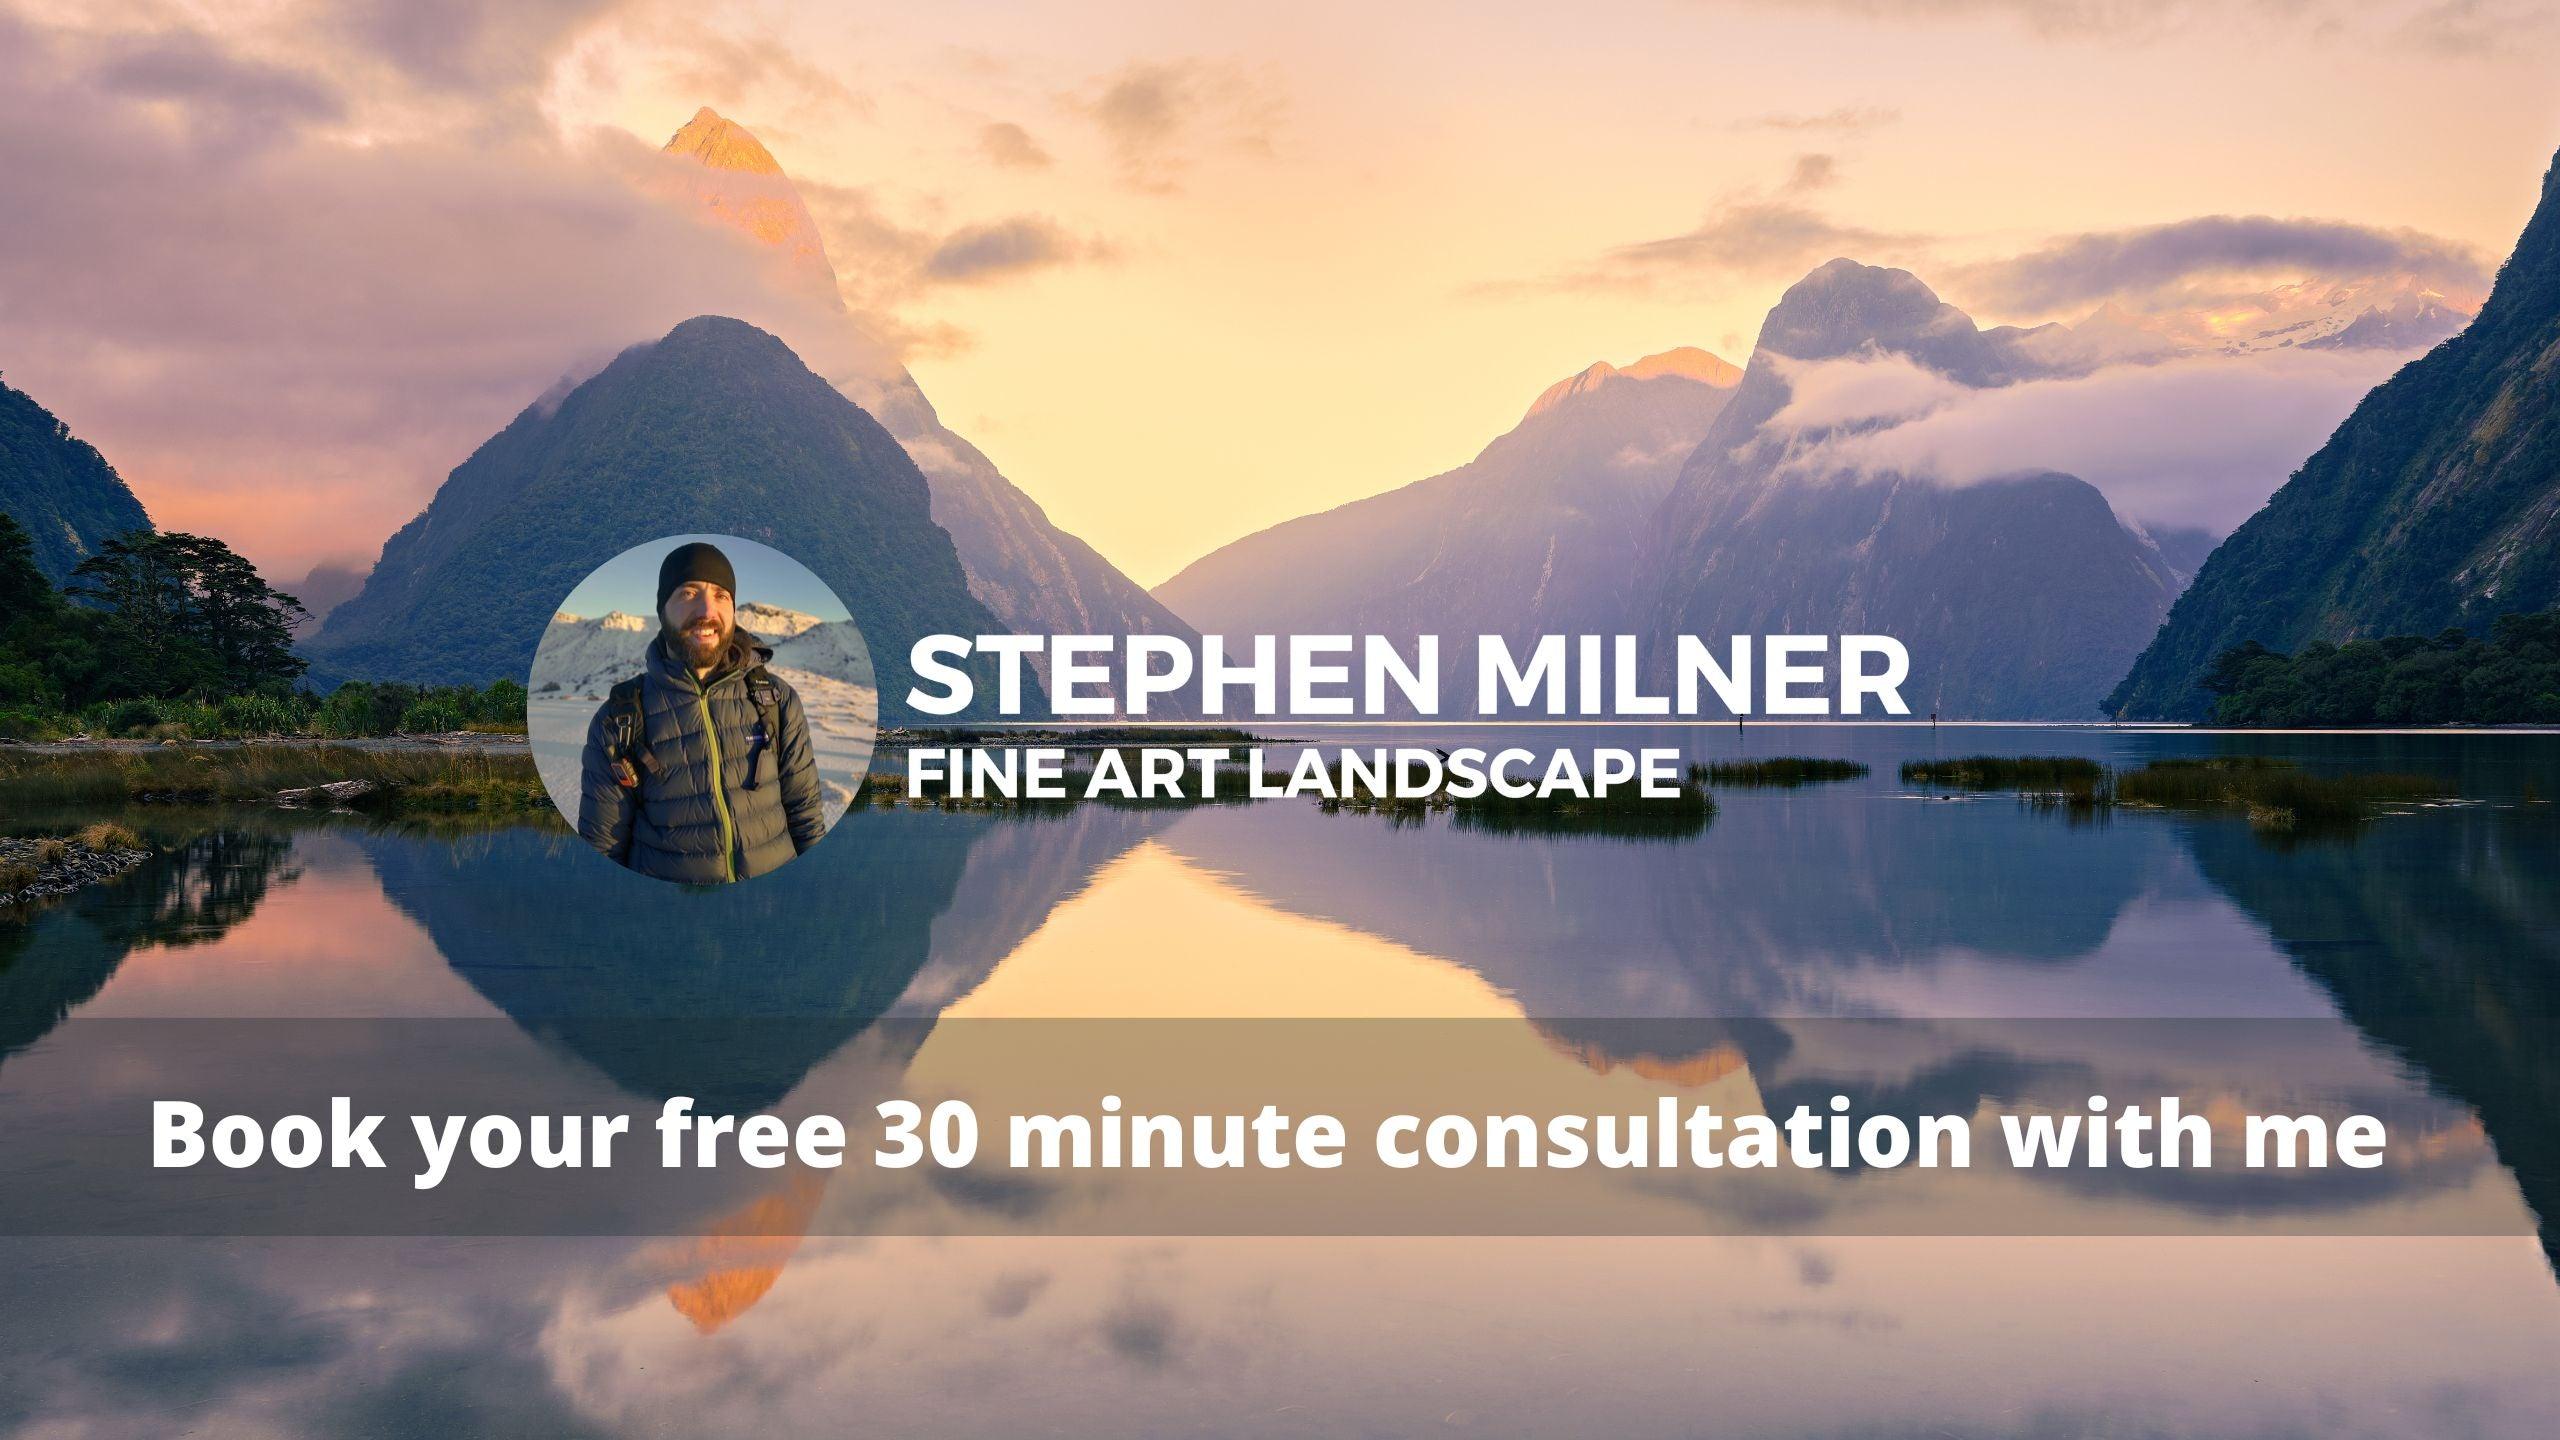 Contact Stephen Milner Today - Don’t let your camera gather dust; explore the art of photography with tailored tours in New Zealand.